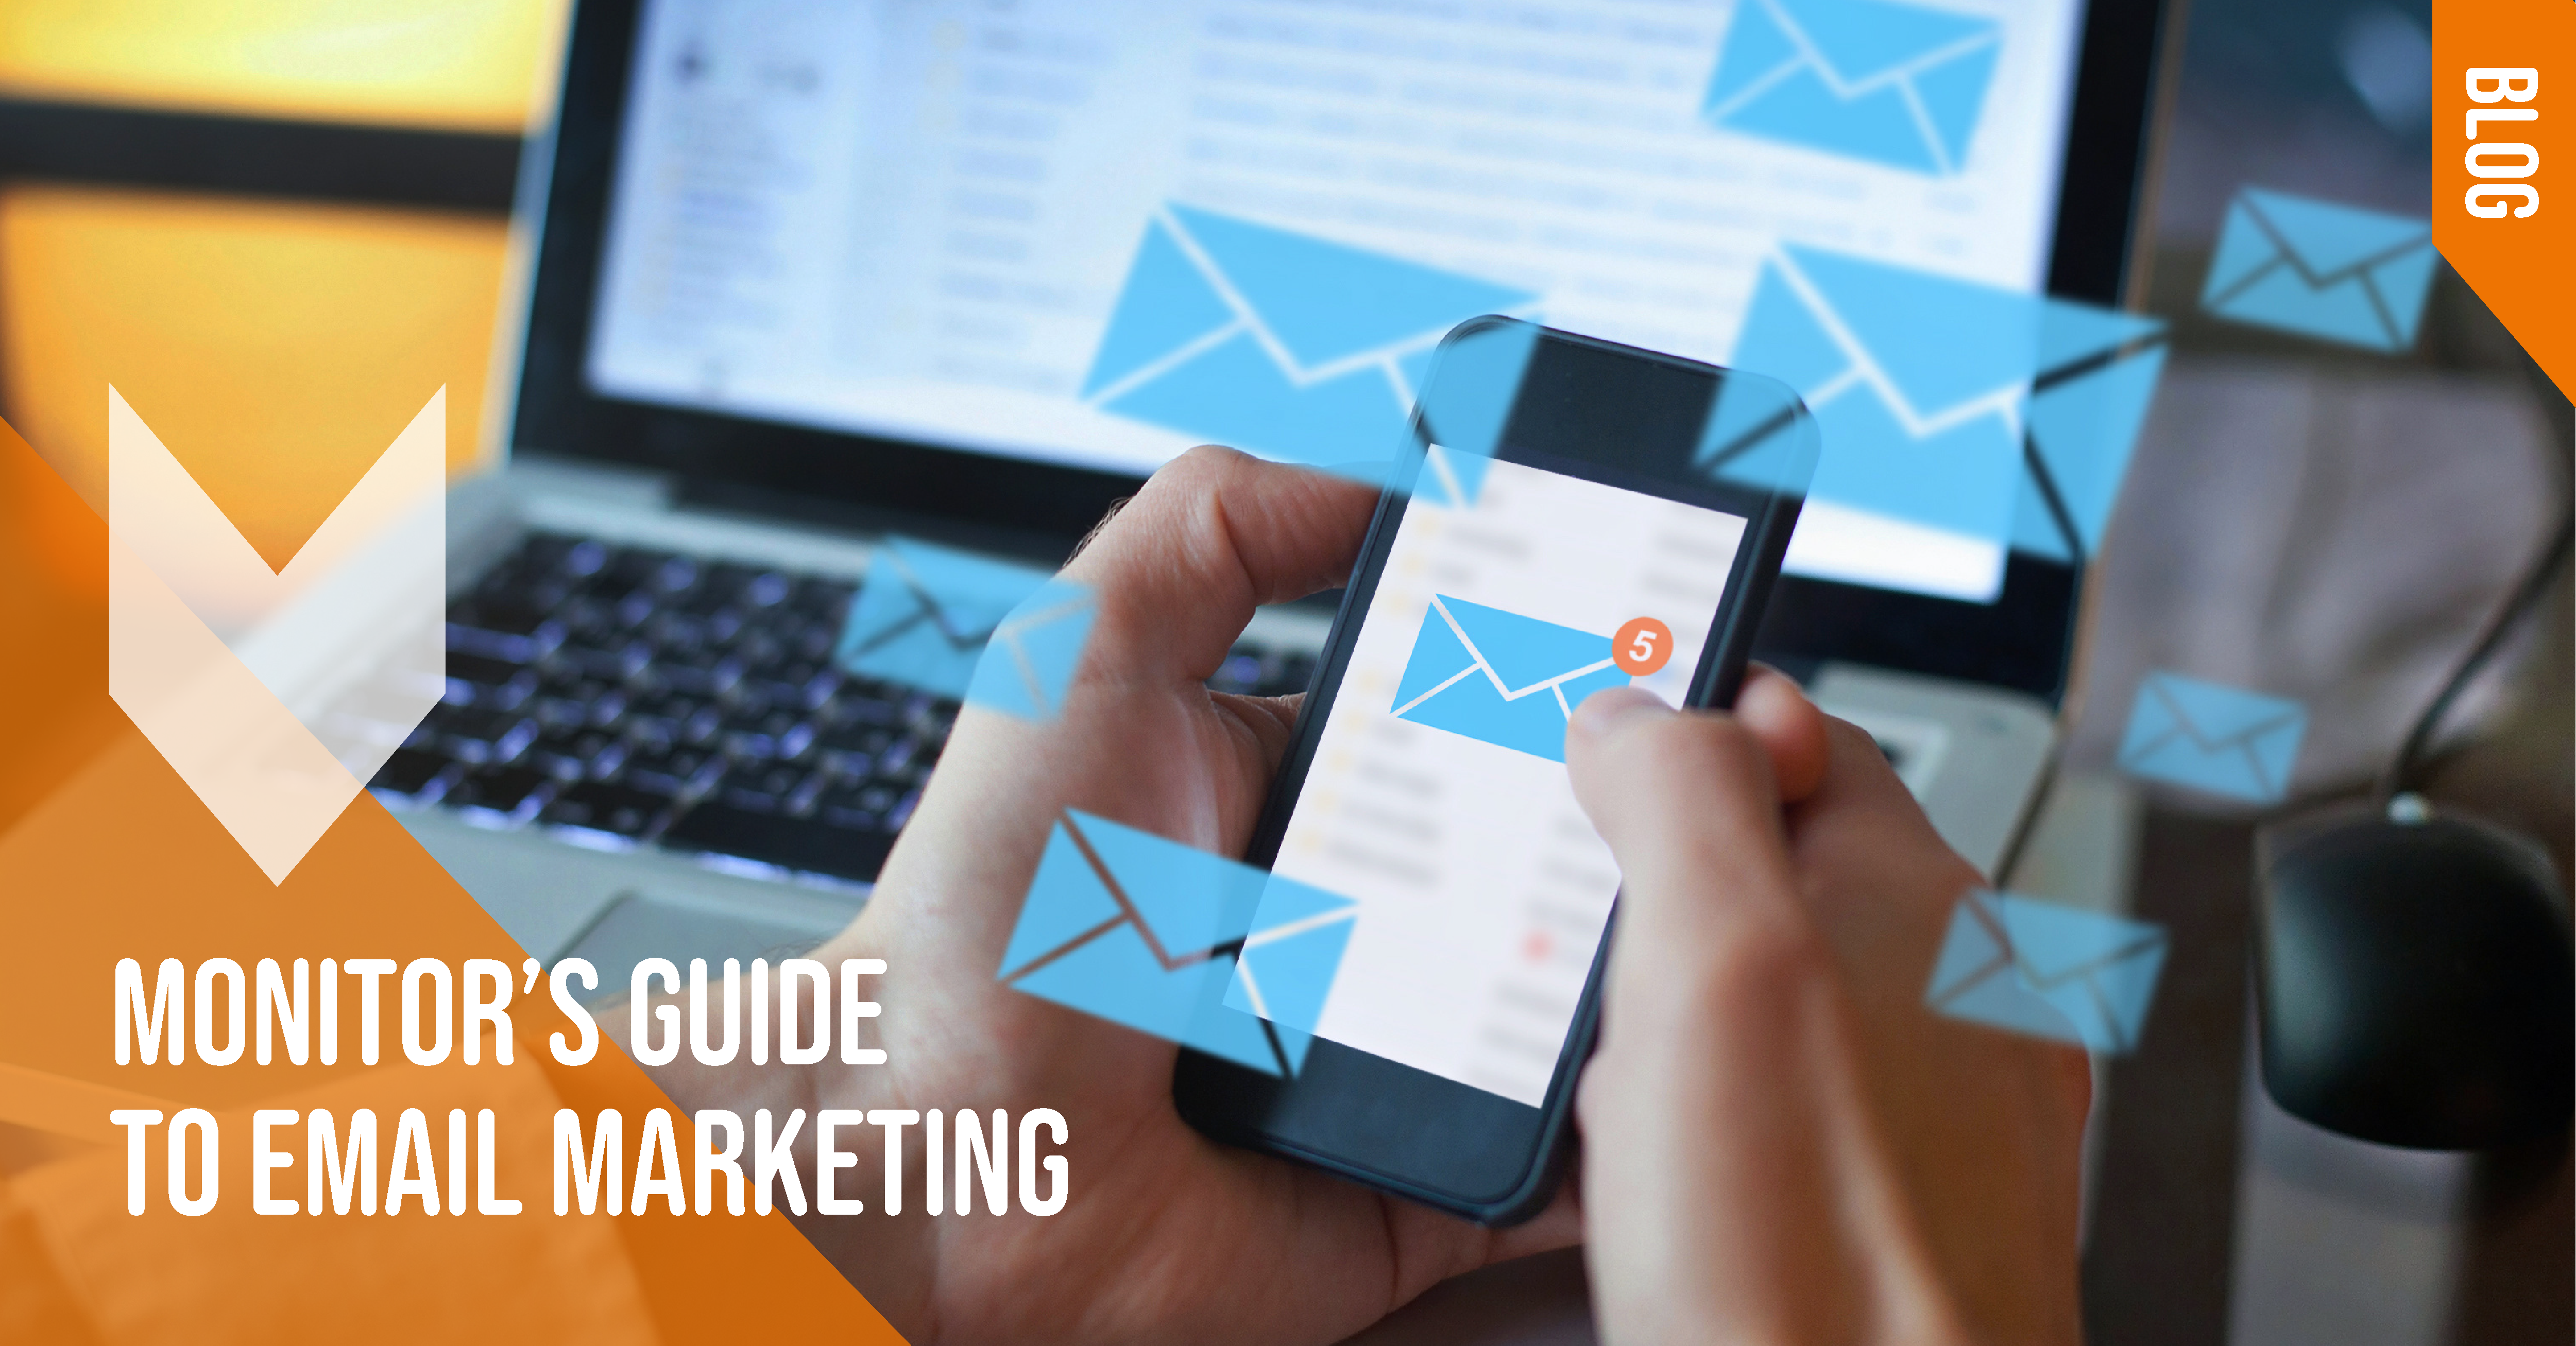 Monitor’s guide to email marketing